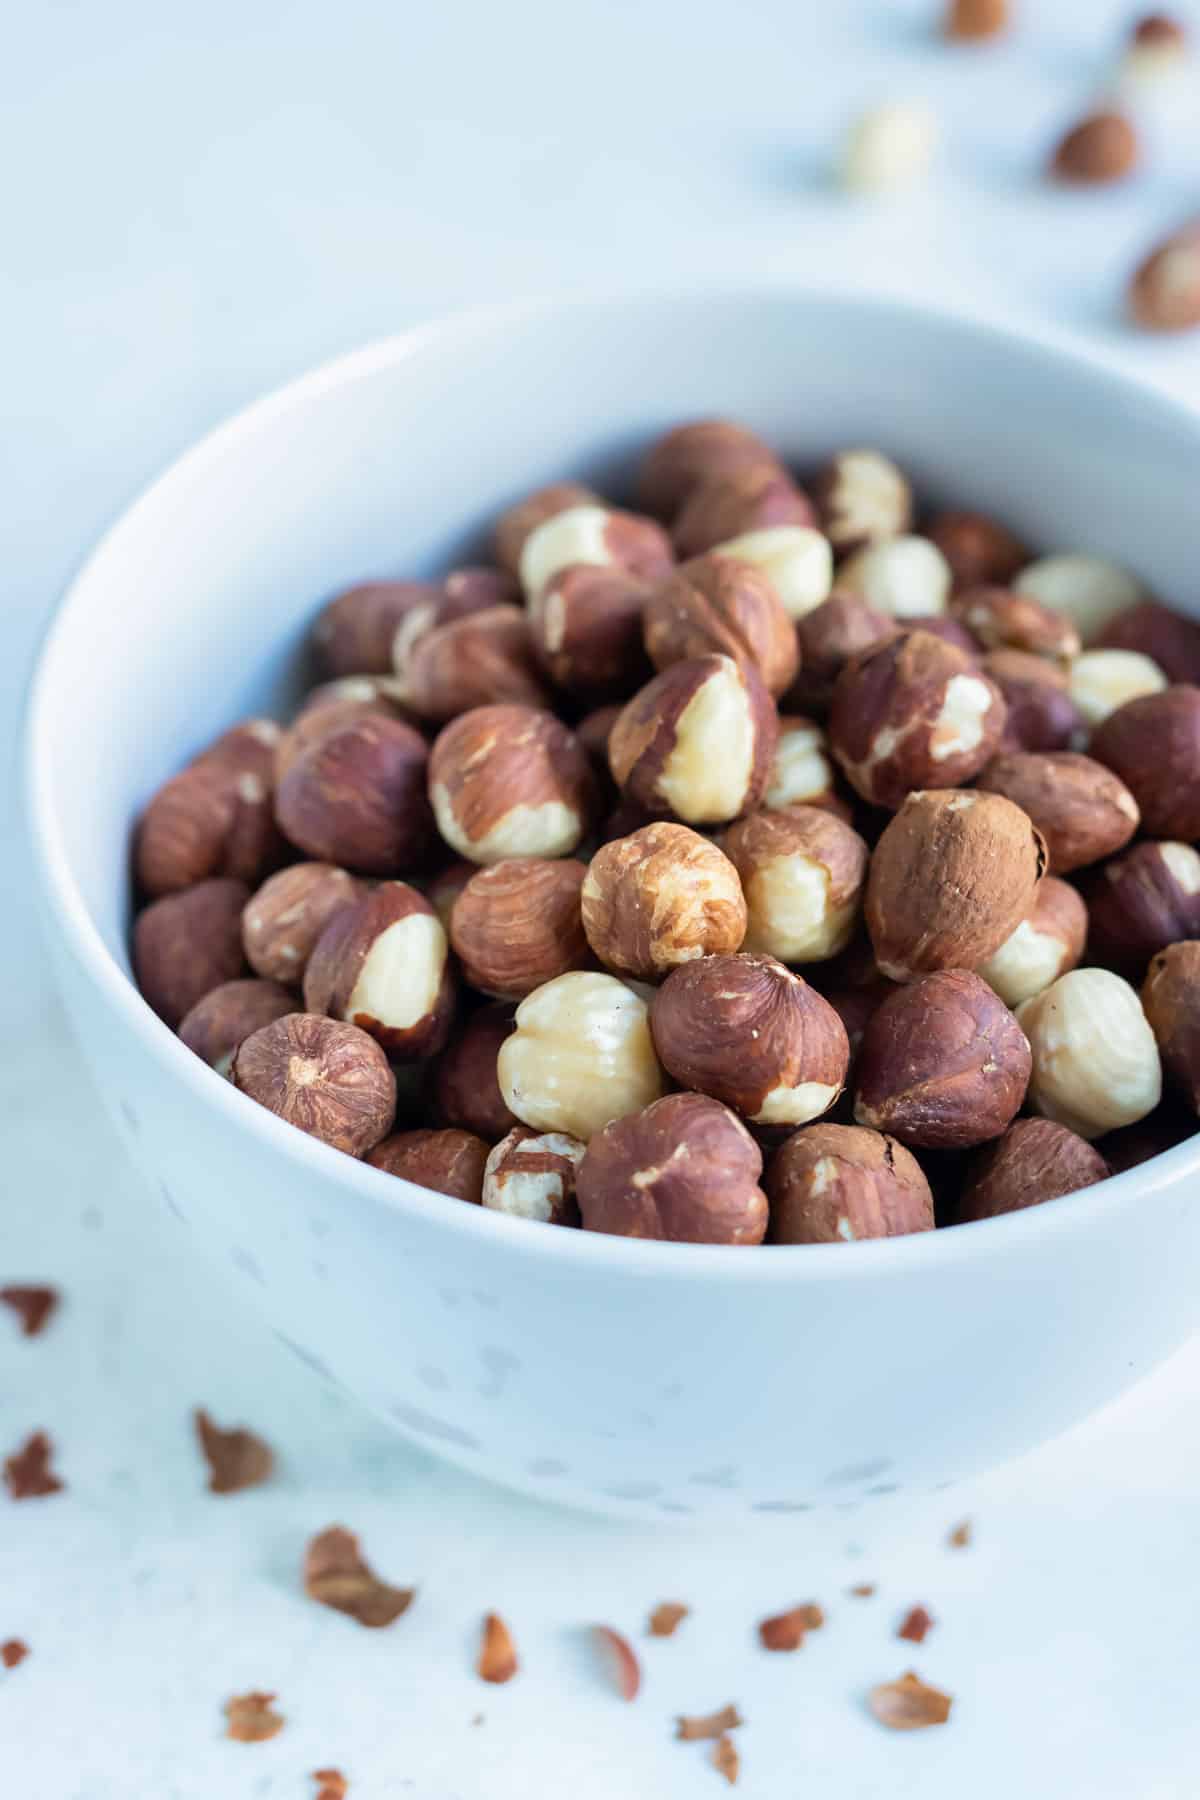 A bowl of toasted hazelnuts is set on the counter for snacking.